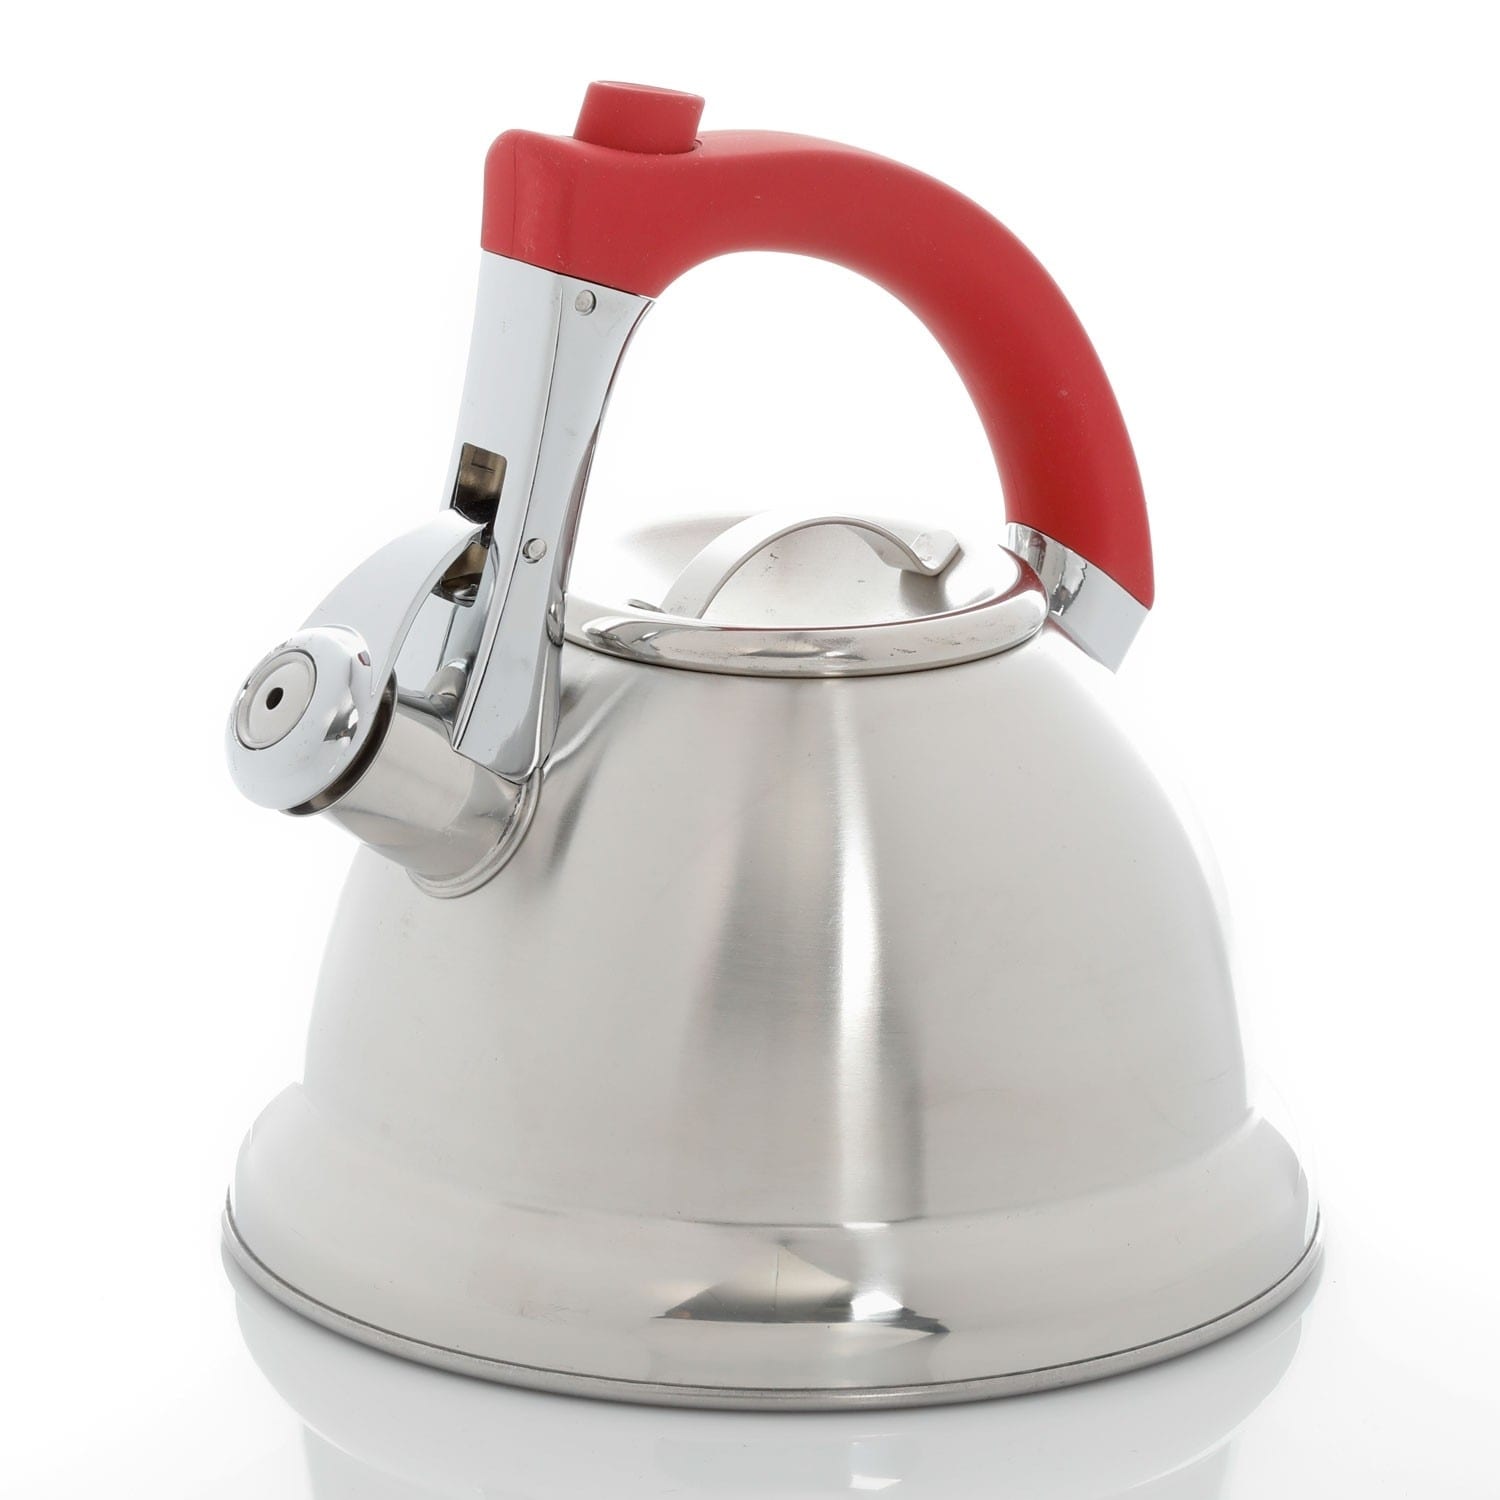 https://ak1.ostkcdn.com/images/products/is/images/direct/4371a65e218de7a357df1719f58023964ddbf2d0/Mr.-Coffee-Collinsbroke-2.4-Quart-Stainless-Steel-Tea-Kettle-with-Red-Handle.jpg